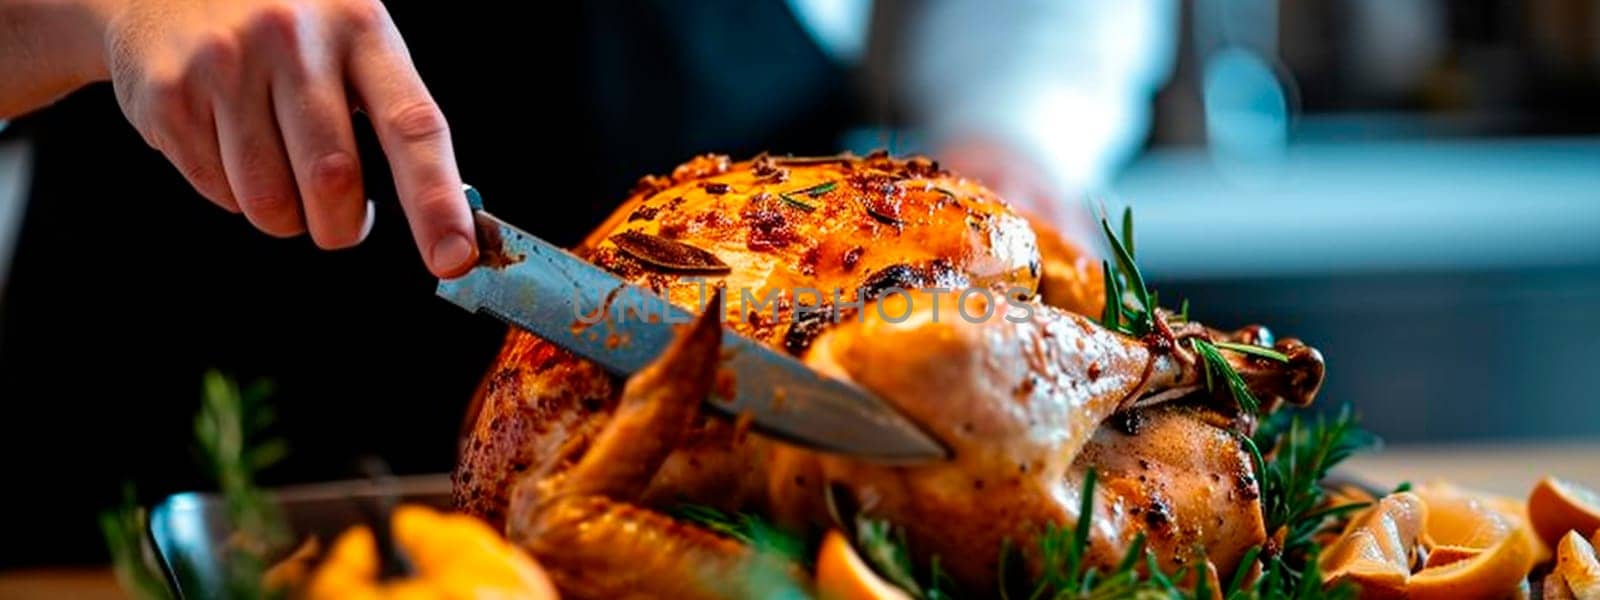 Cutting turkey with a knife on the table. Selective focus. by yanadjana